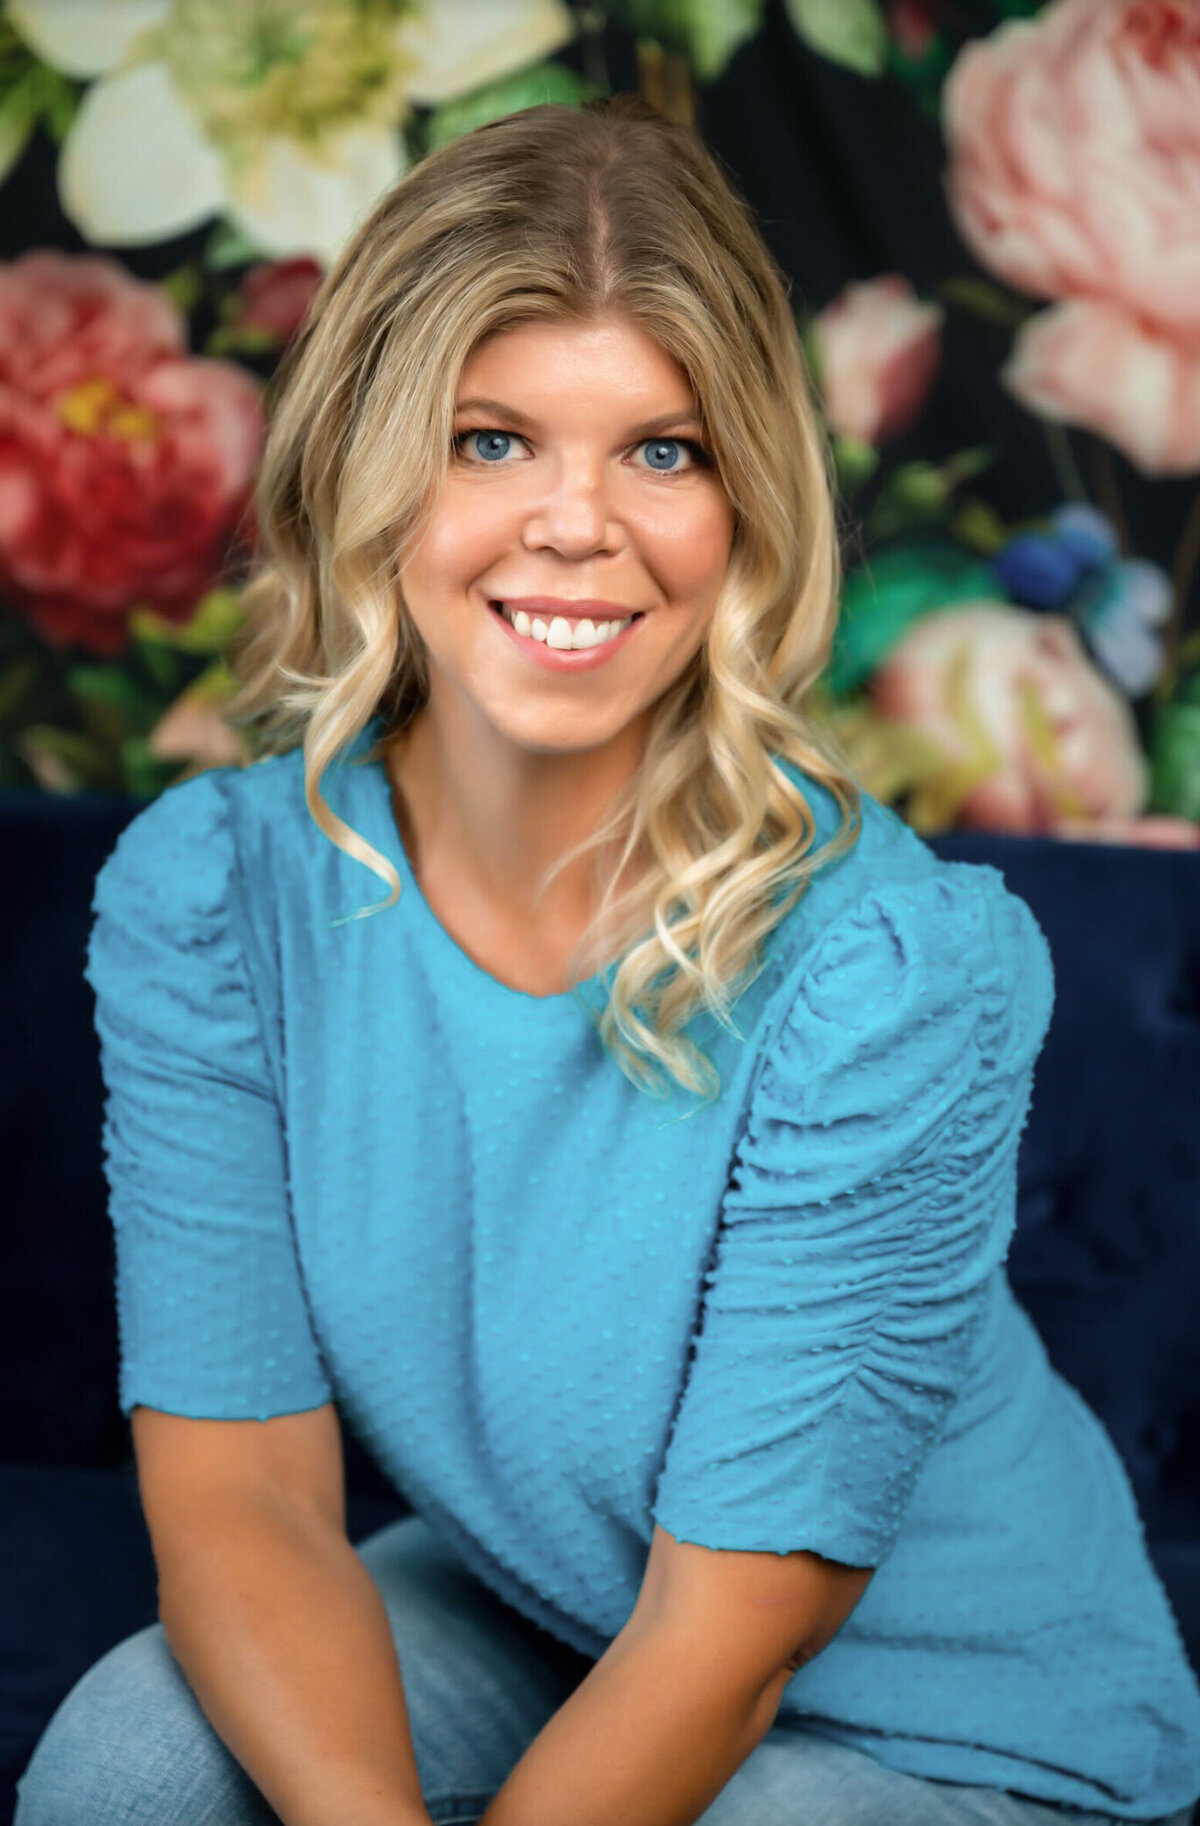 A woman with blonde hair and blue eyes wearing a blue shirt in front of a floral background posing for a headshot